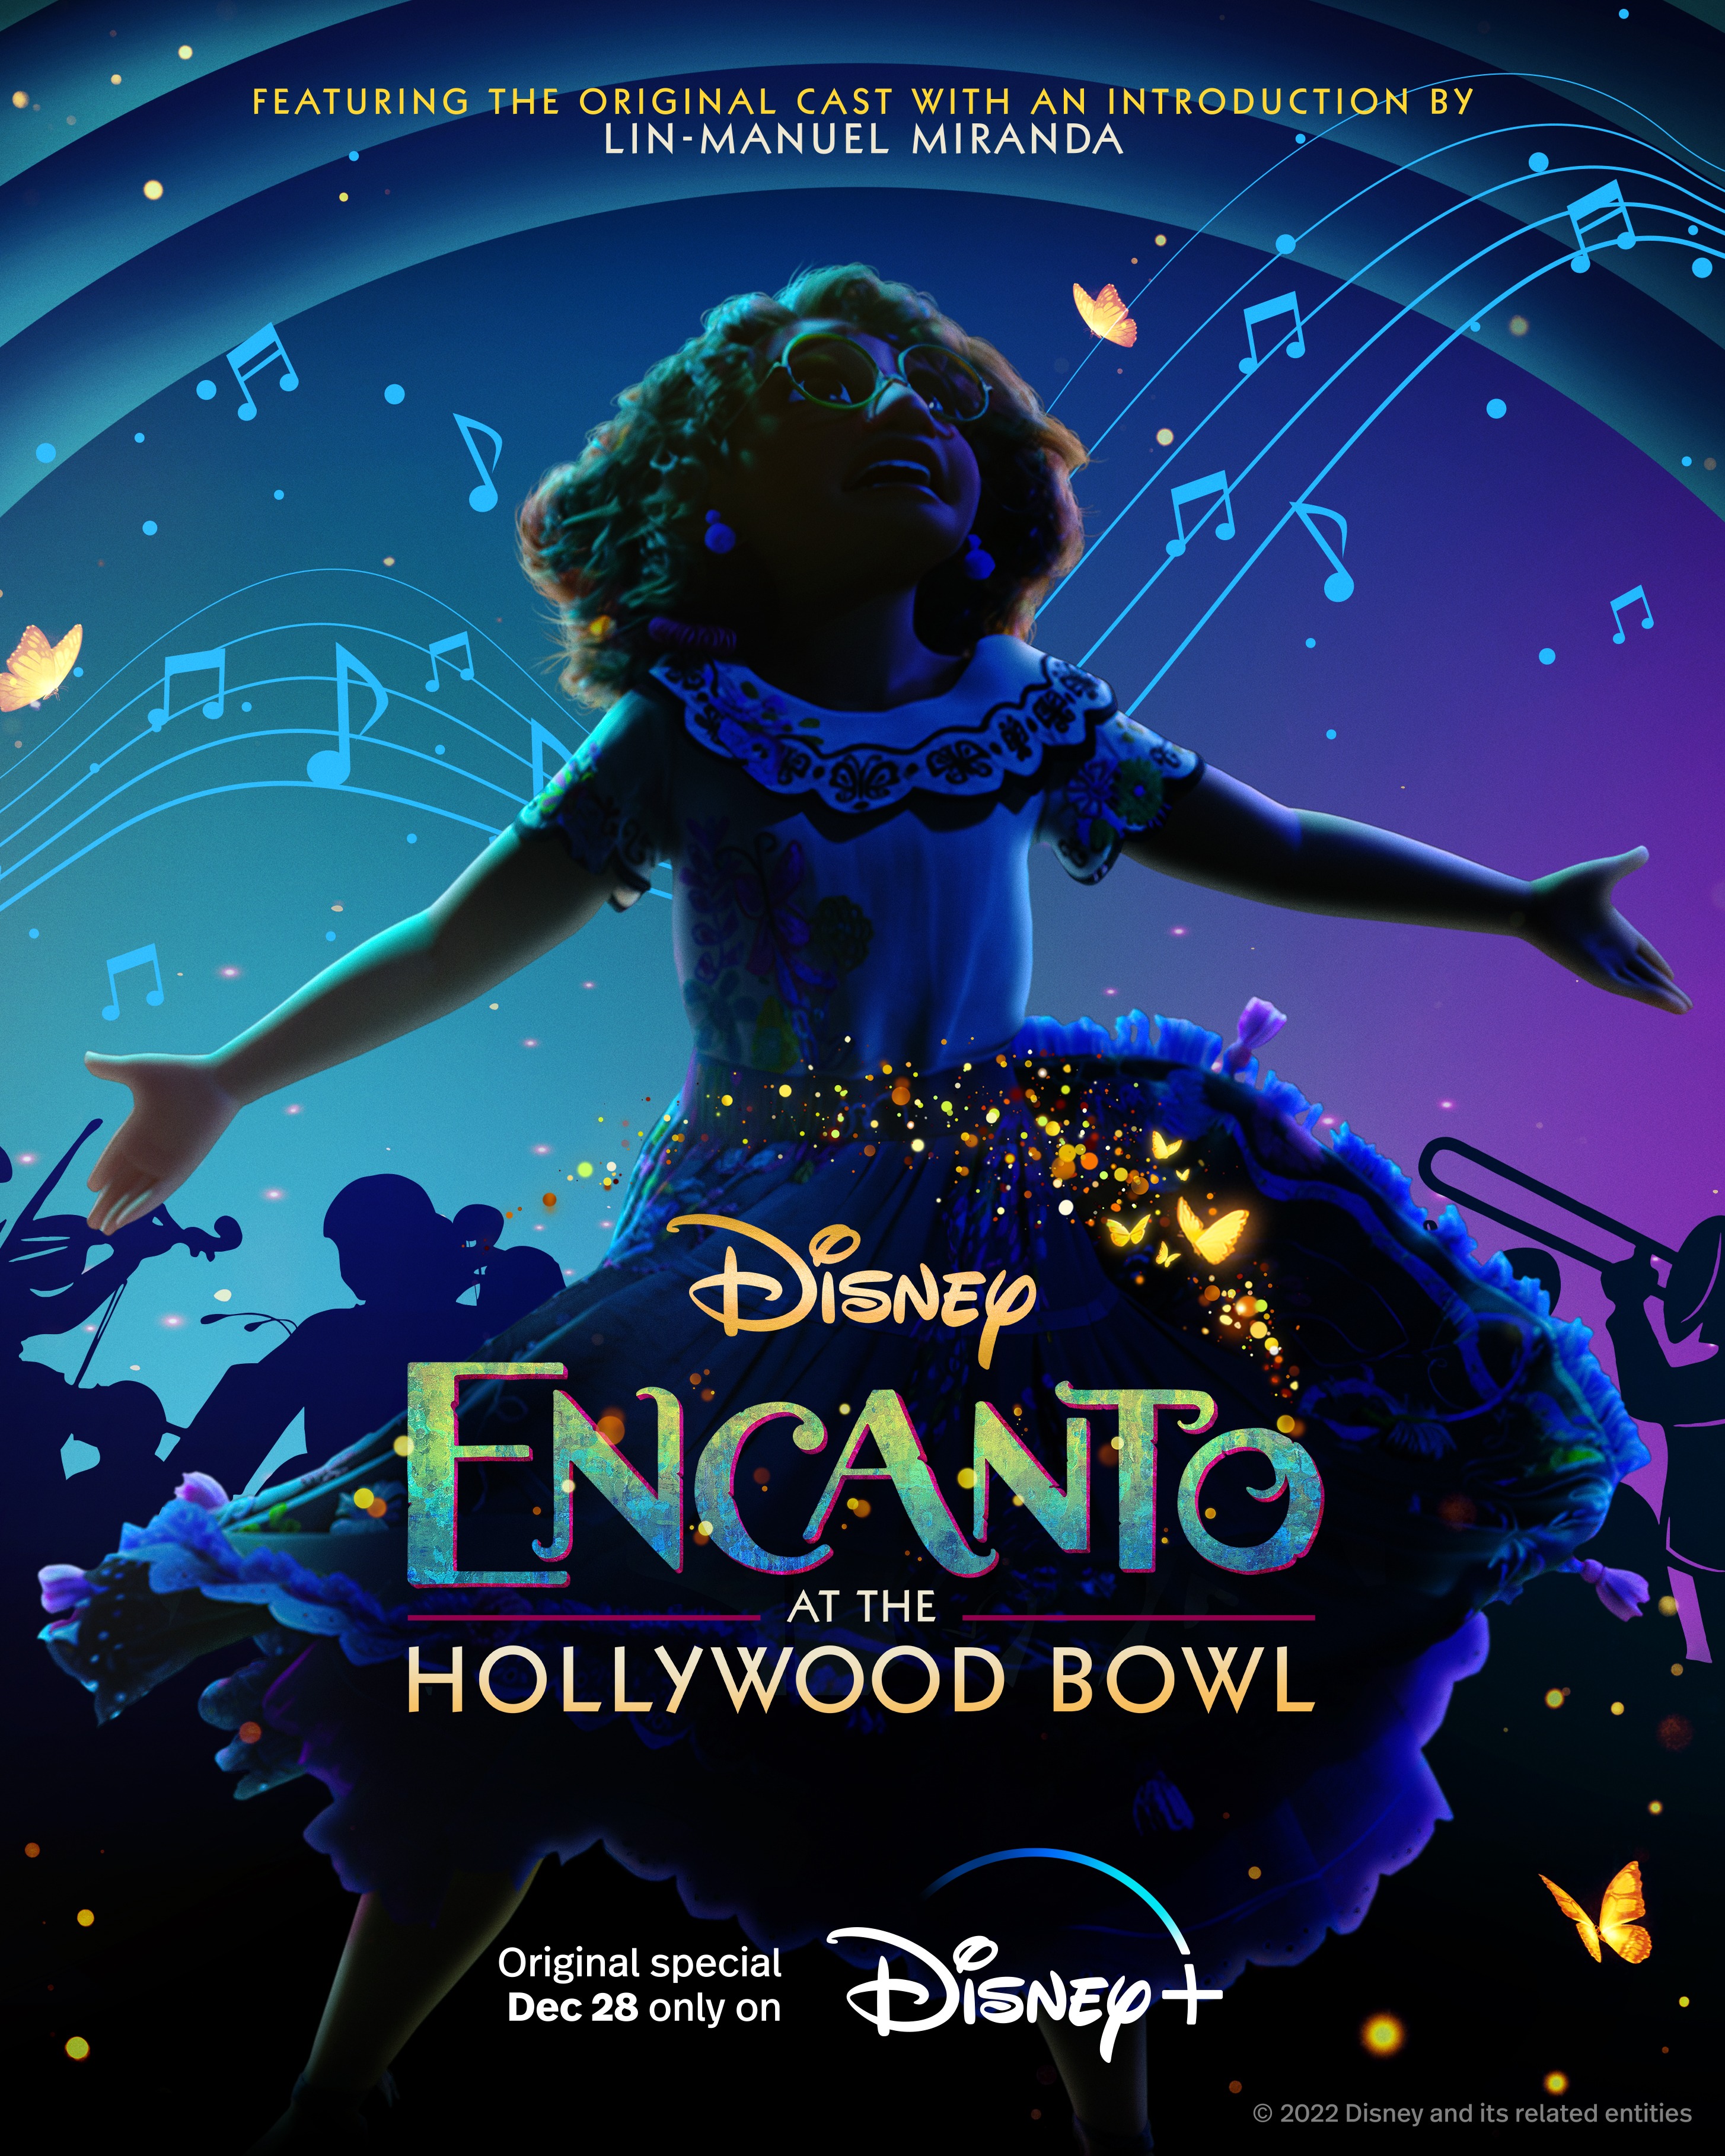 https://static.wikia.nocookie.net/disney/images/d/dd/Encanto_at_the_Hollywood_Bowl_poster.jpg/revision/latest?cb=20221215192415